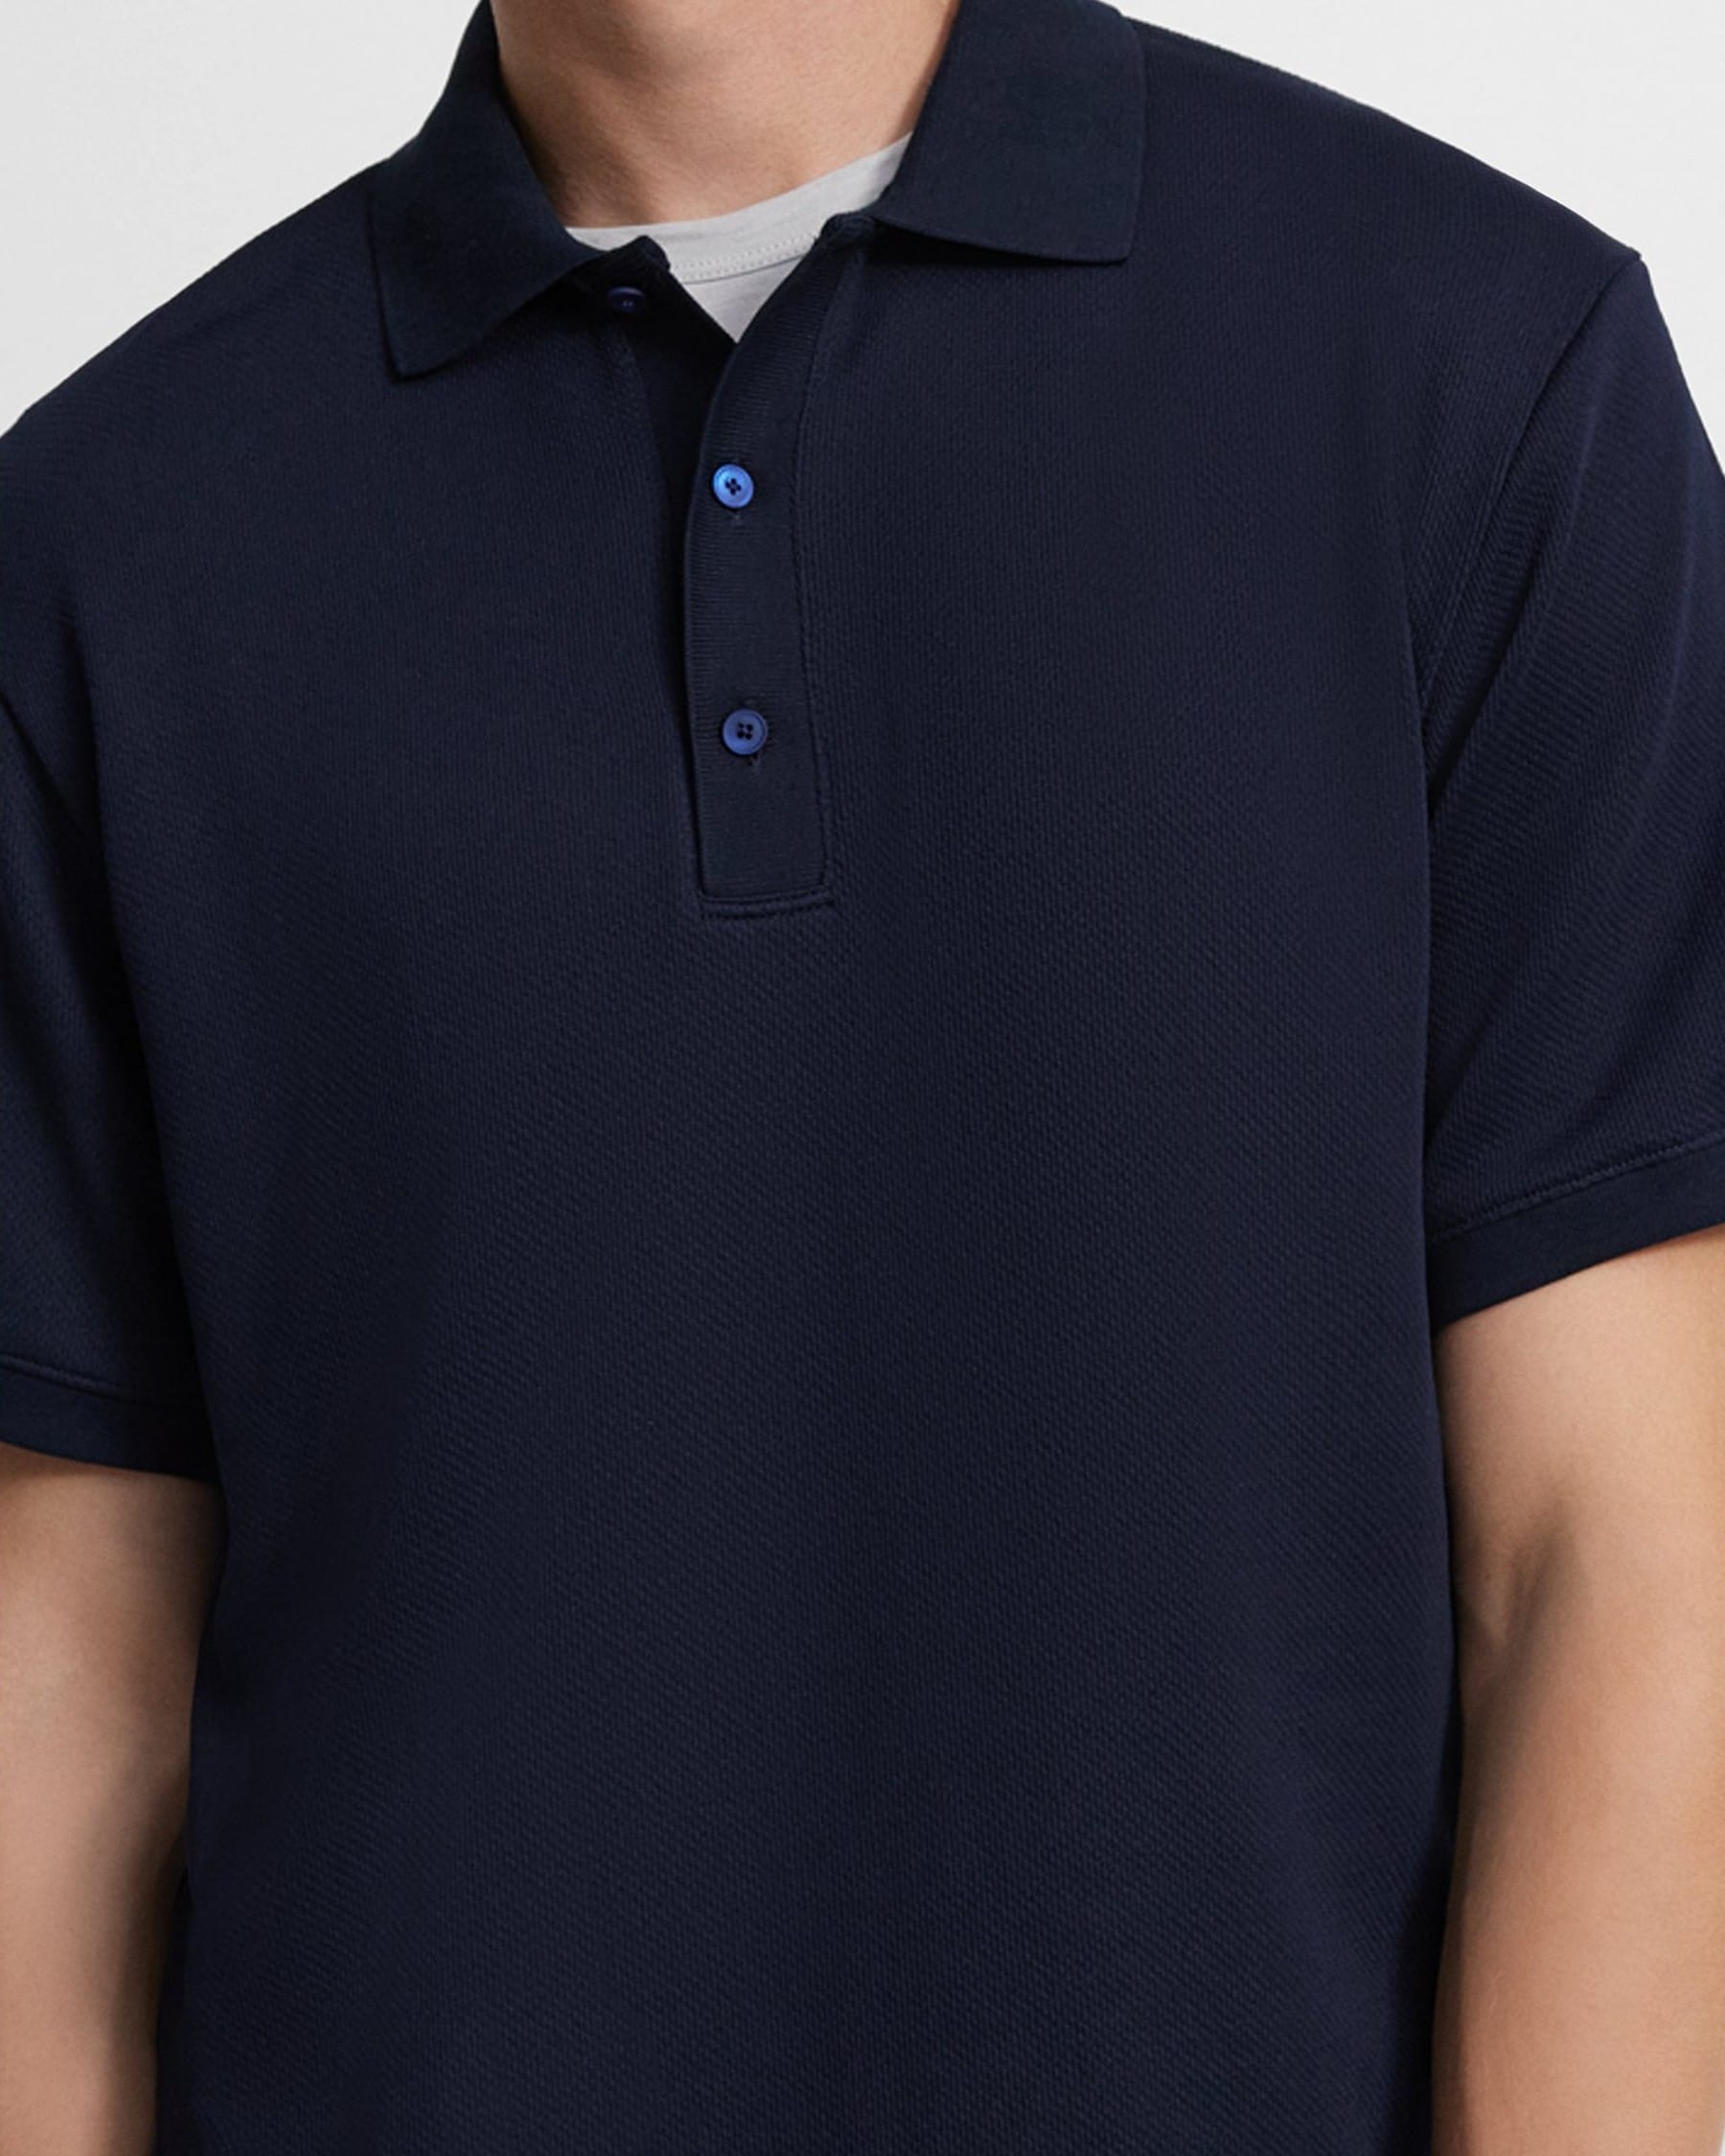 Droyer Polo Shirt in Studio Knit Jacquard